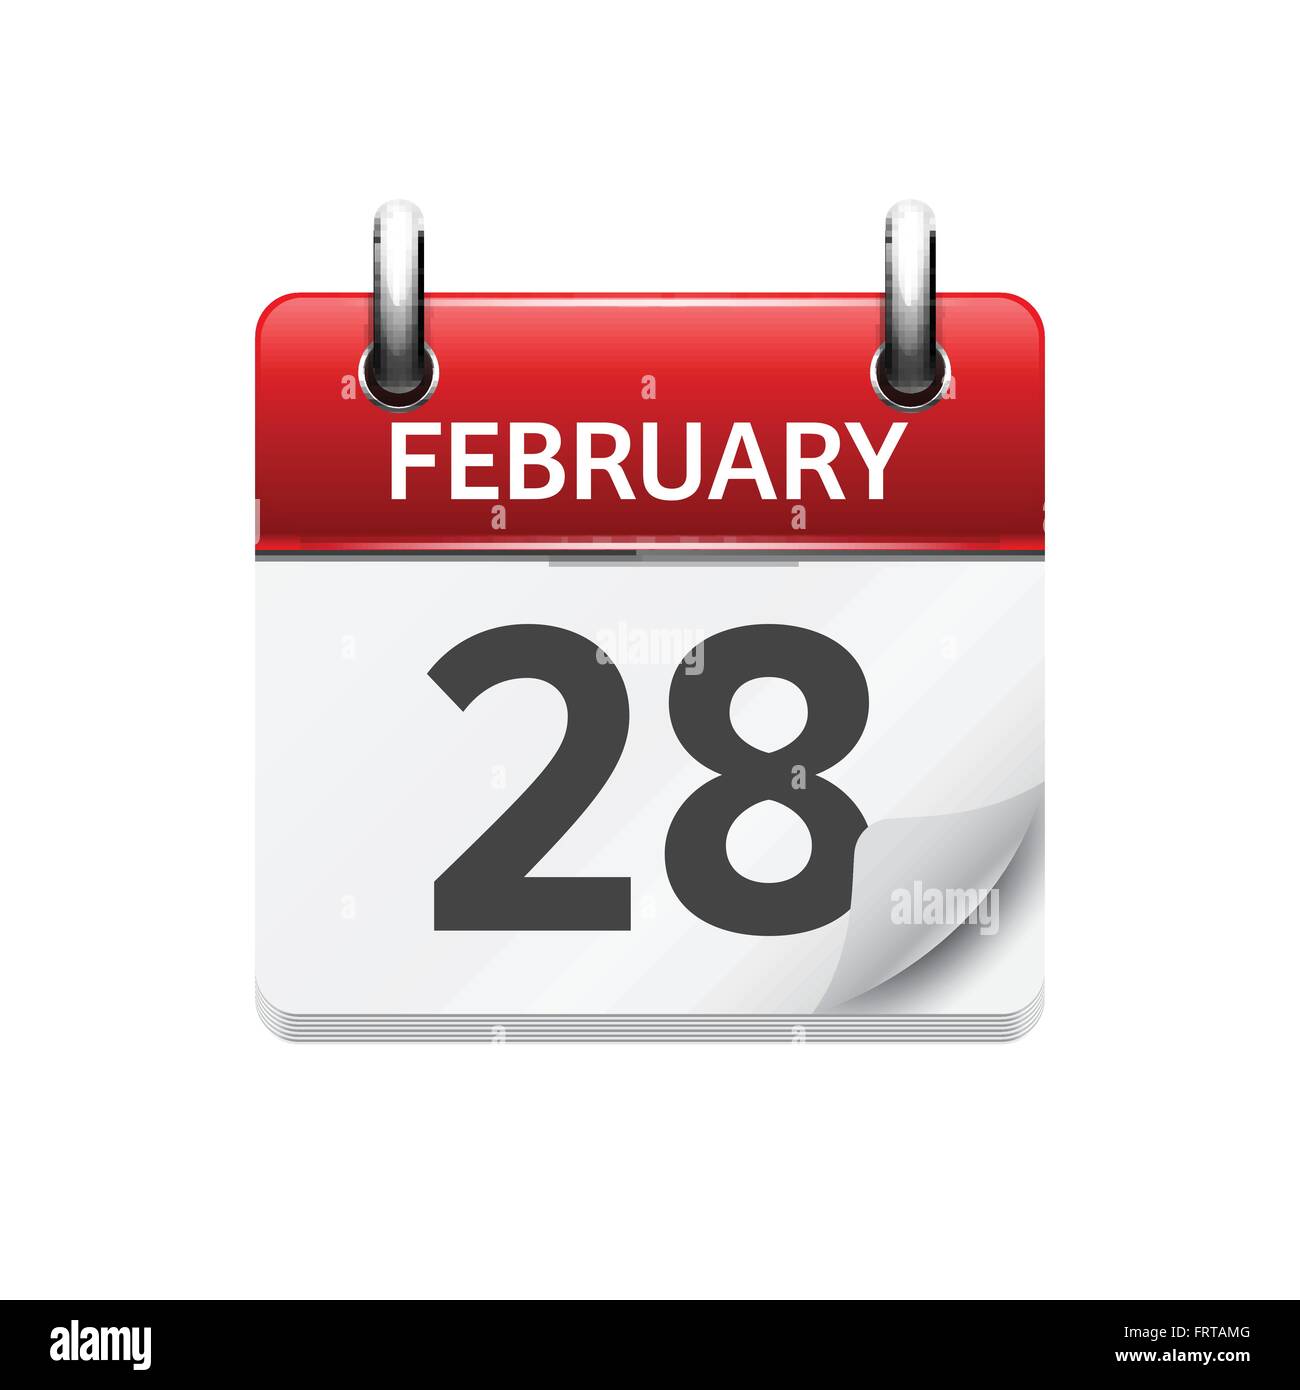 February 28. Vector flat daily calendar icon. Date and time, day, month. Holiday. Stock Vector